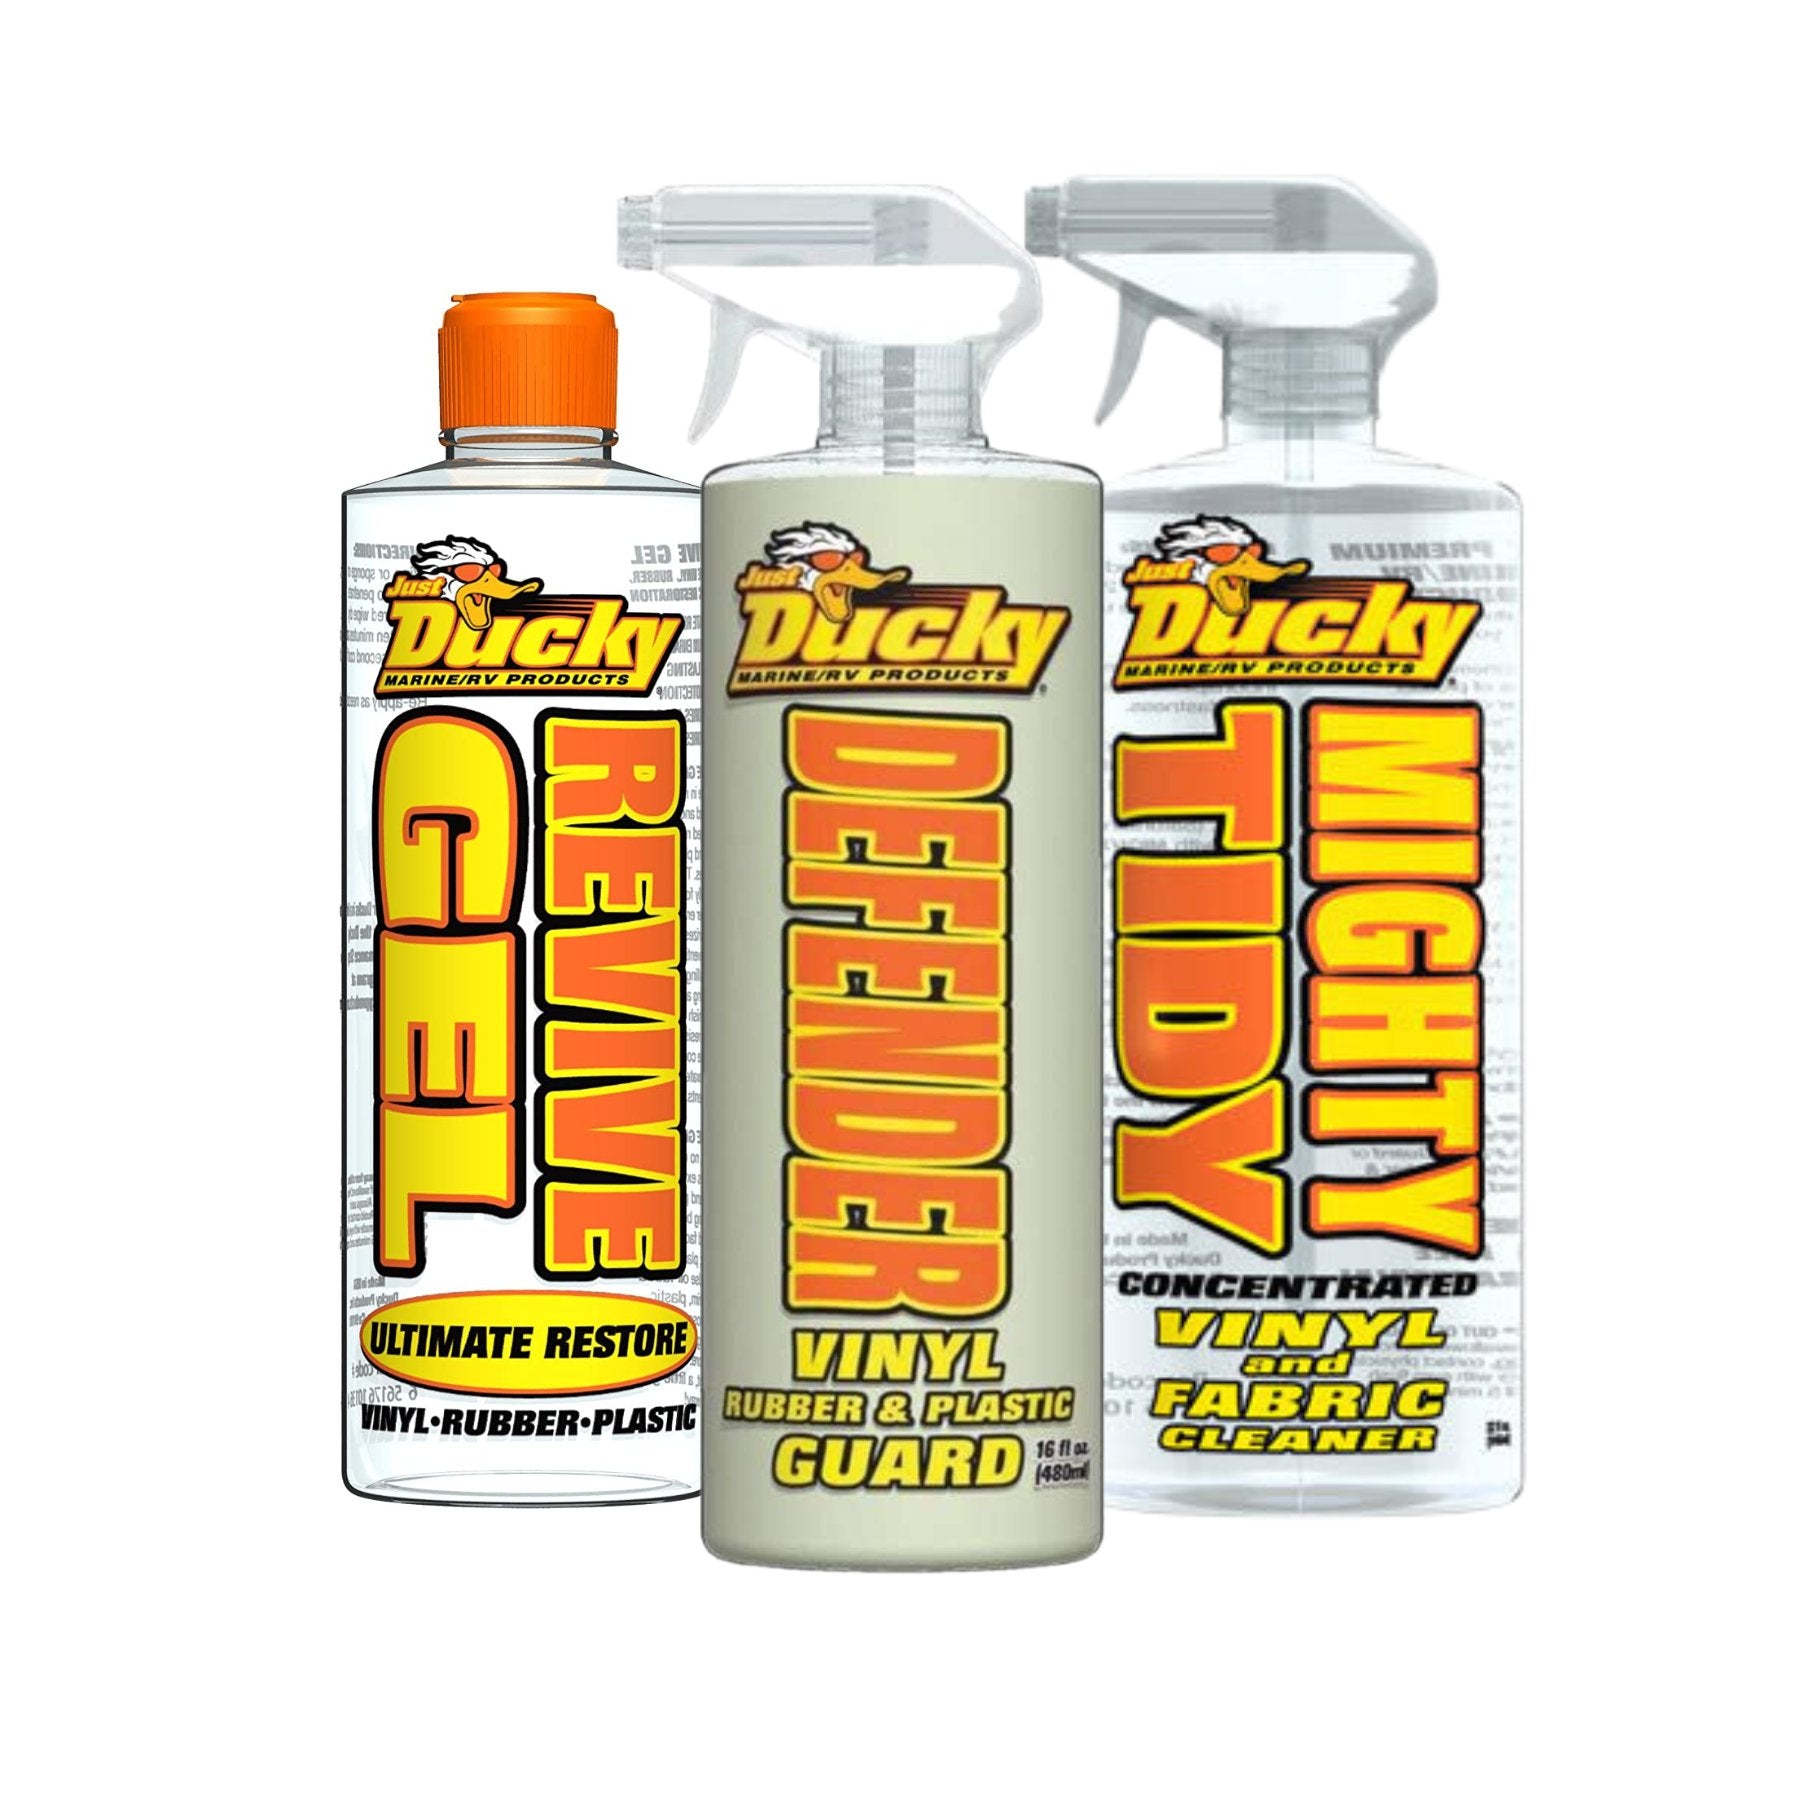 Mighty Tidy - Vinyl & Fabric Cleaner – DUCKY PRODUCTS